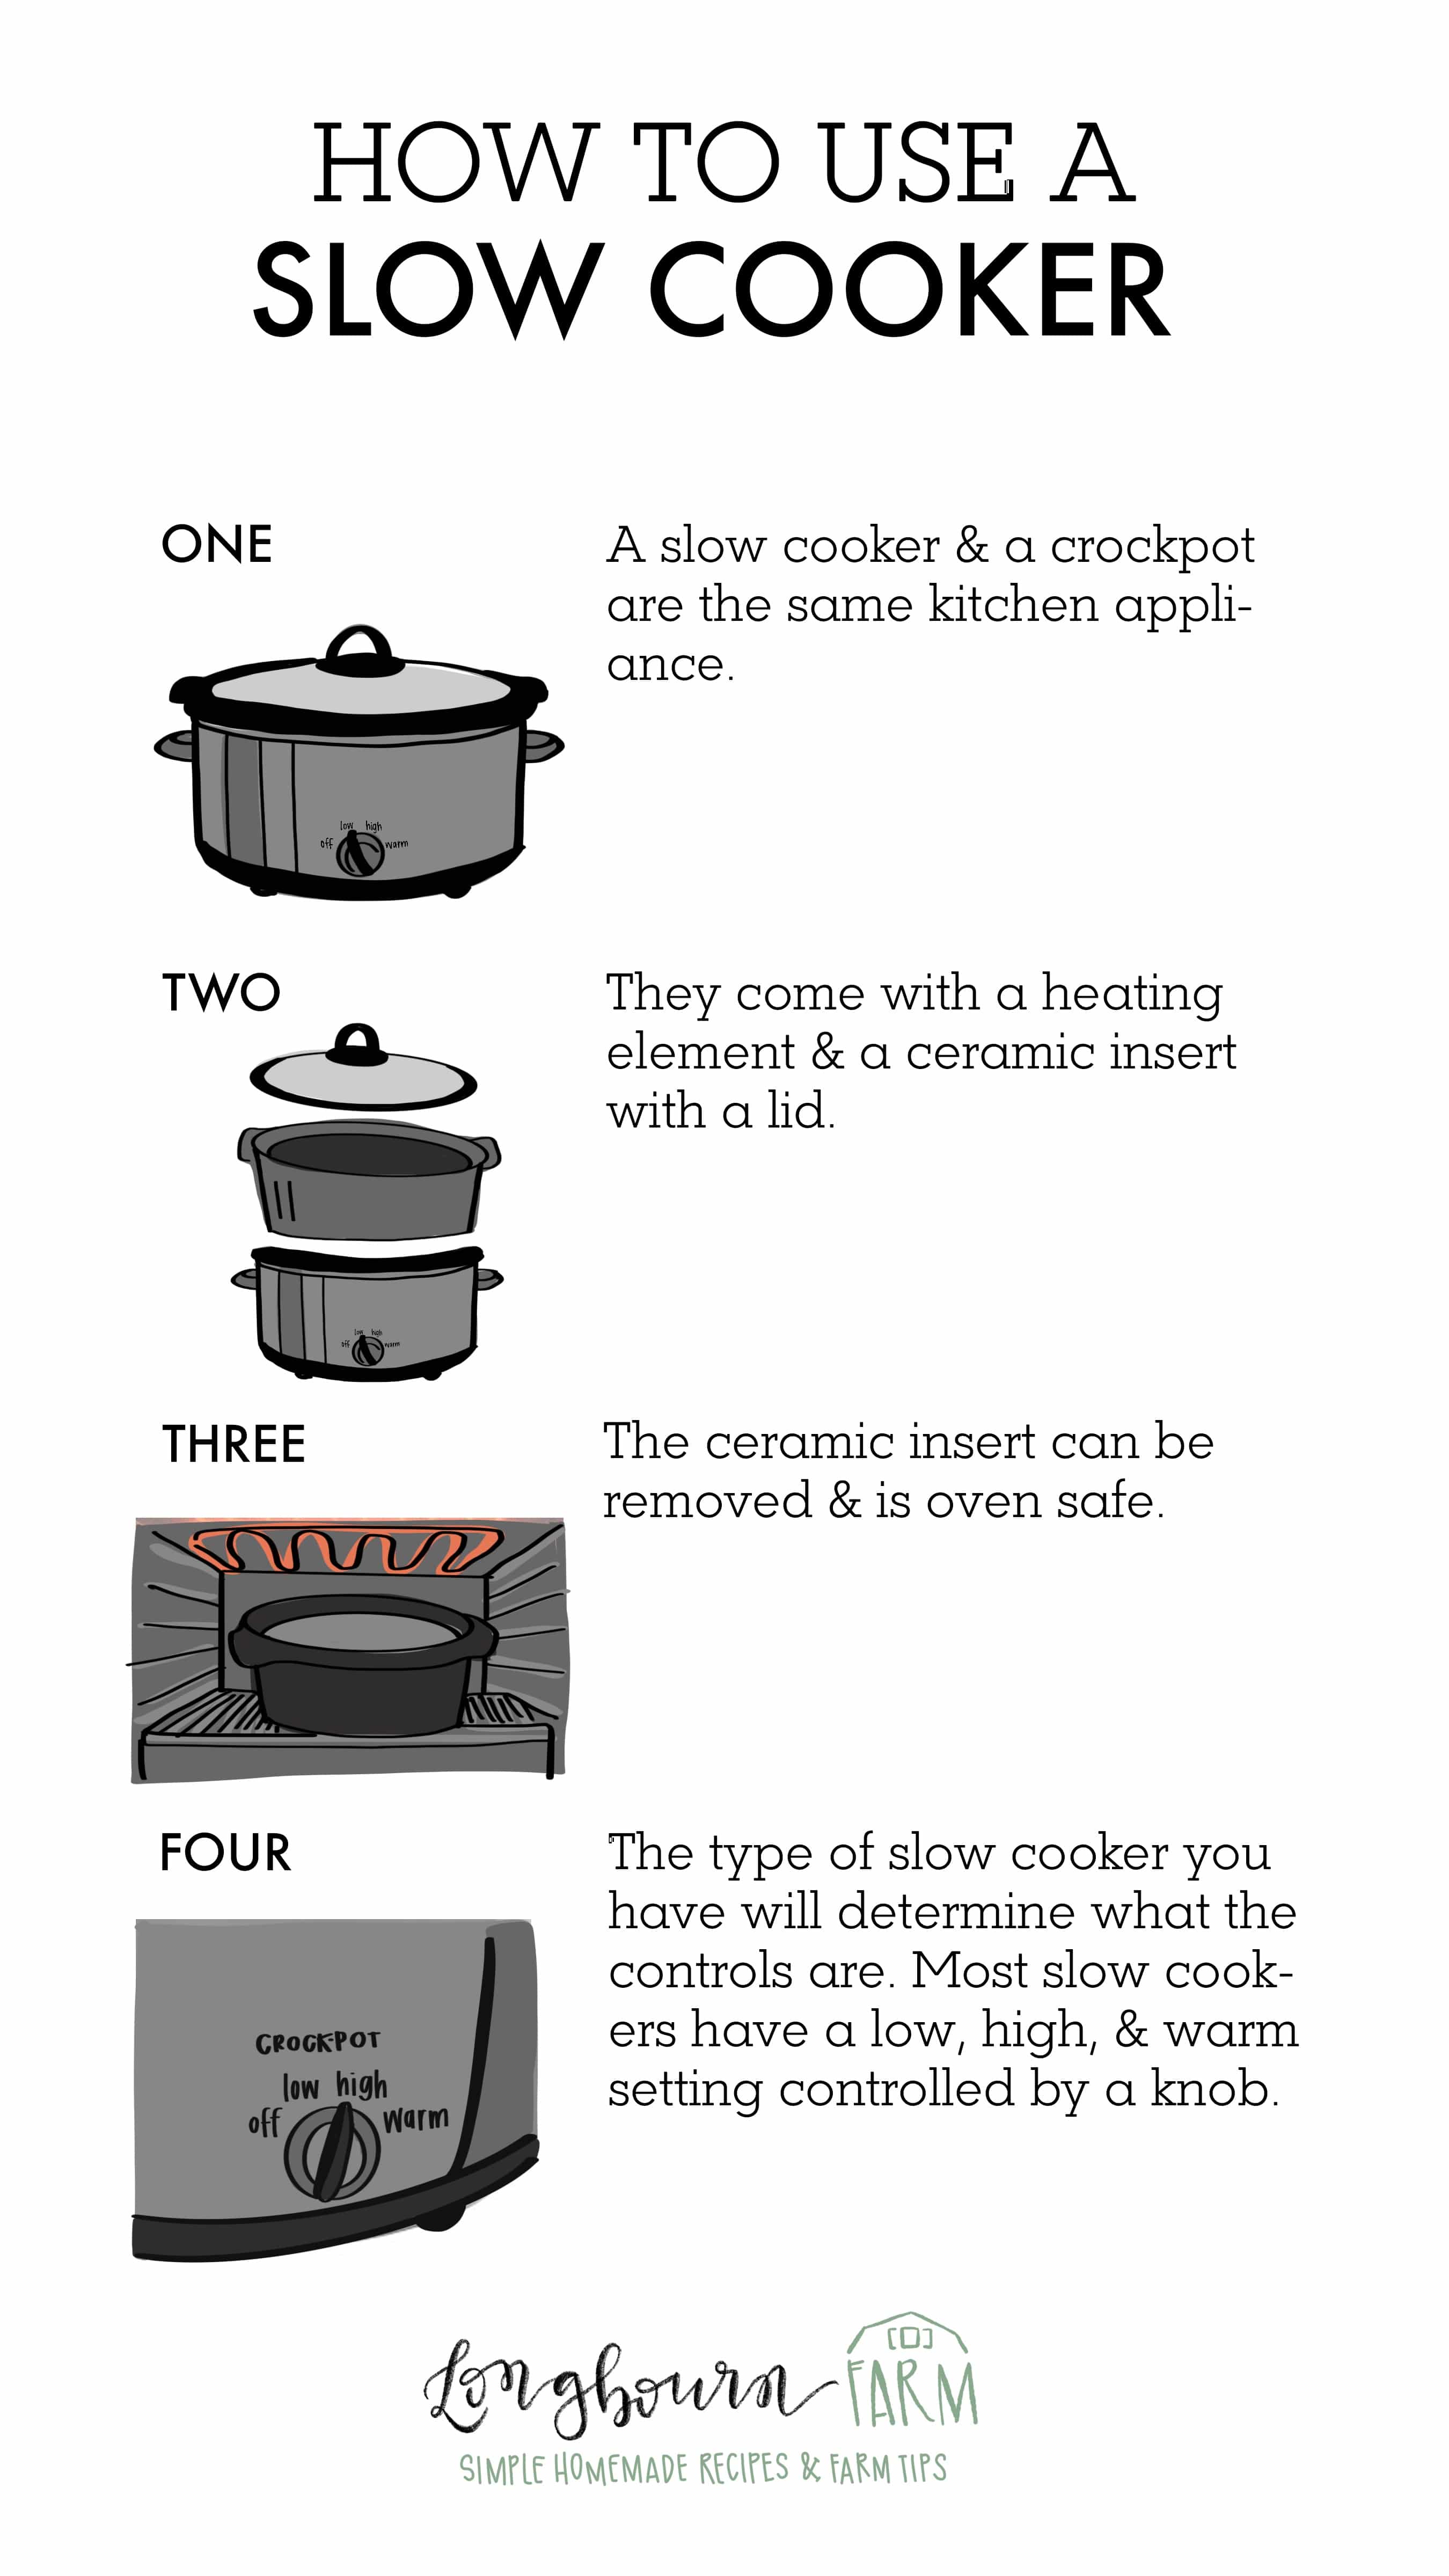 Learning how to use a slow cooker or crockpot is super easy! Read this quick guide to get all the details you need plus some easy recipes! #slowcooker #crockpot #slowcookerrecipes #crockpotrecipes #howtouseaslowcooker #howtouseacrockpot #easyslowcookerrecipes #easycrockpotrecipes #slowcooking #crockpotcooking